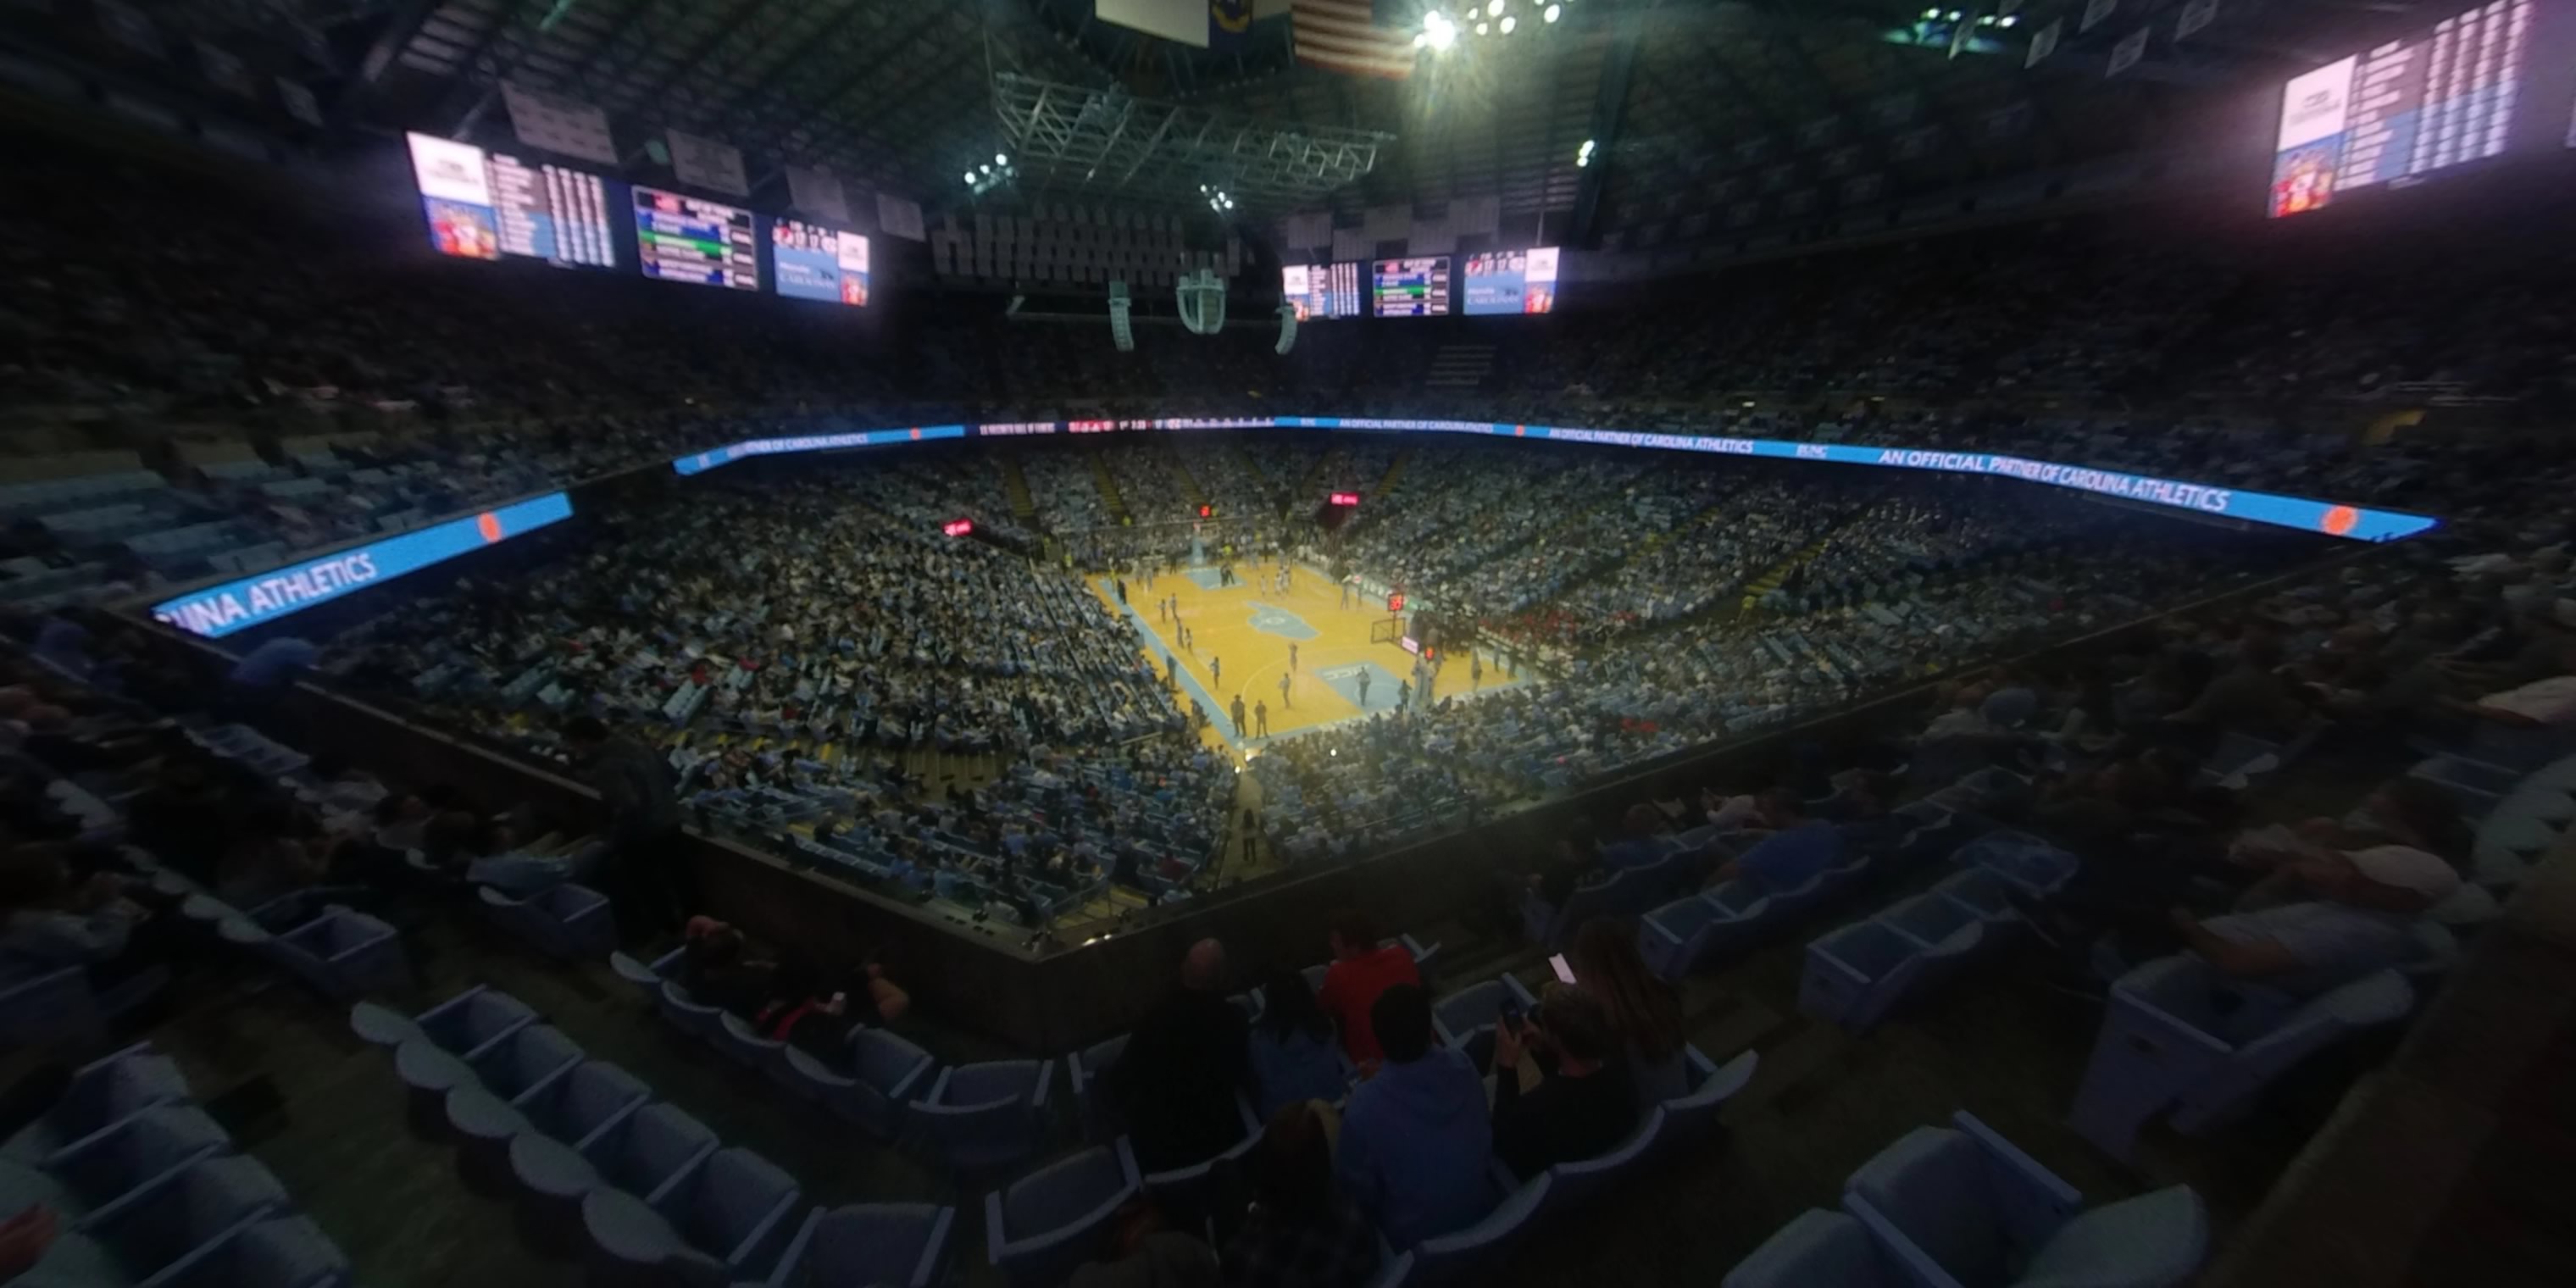 section 232 panoramic seat view  - dean smith center